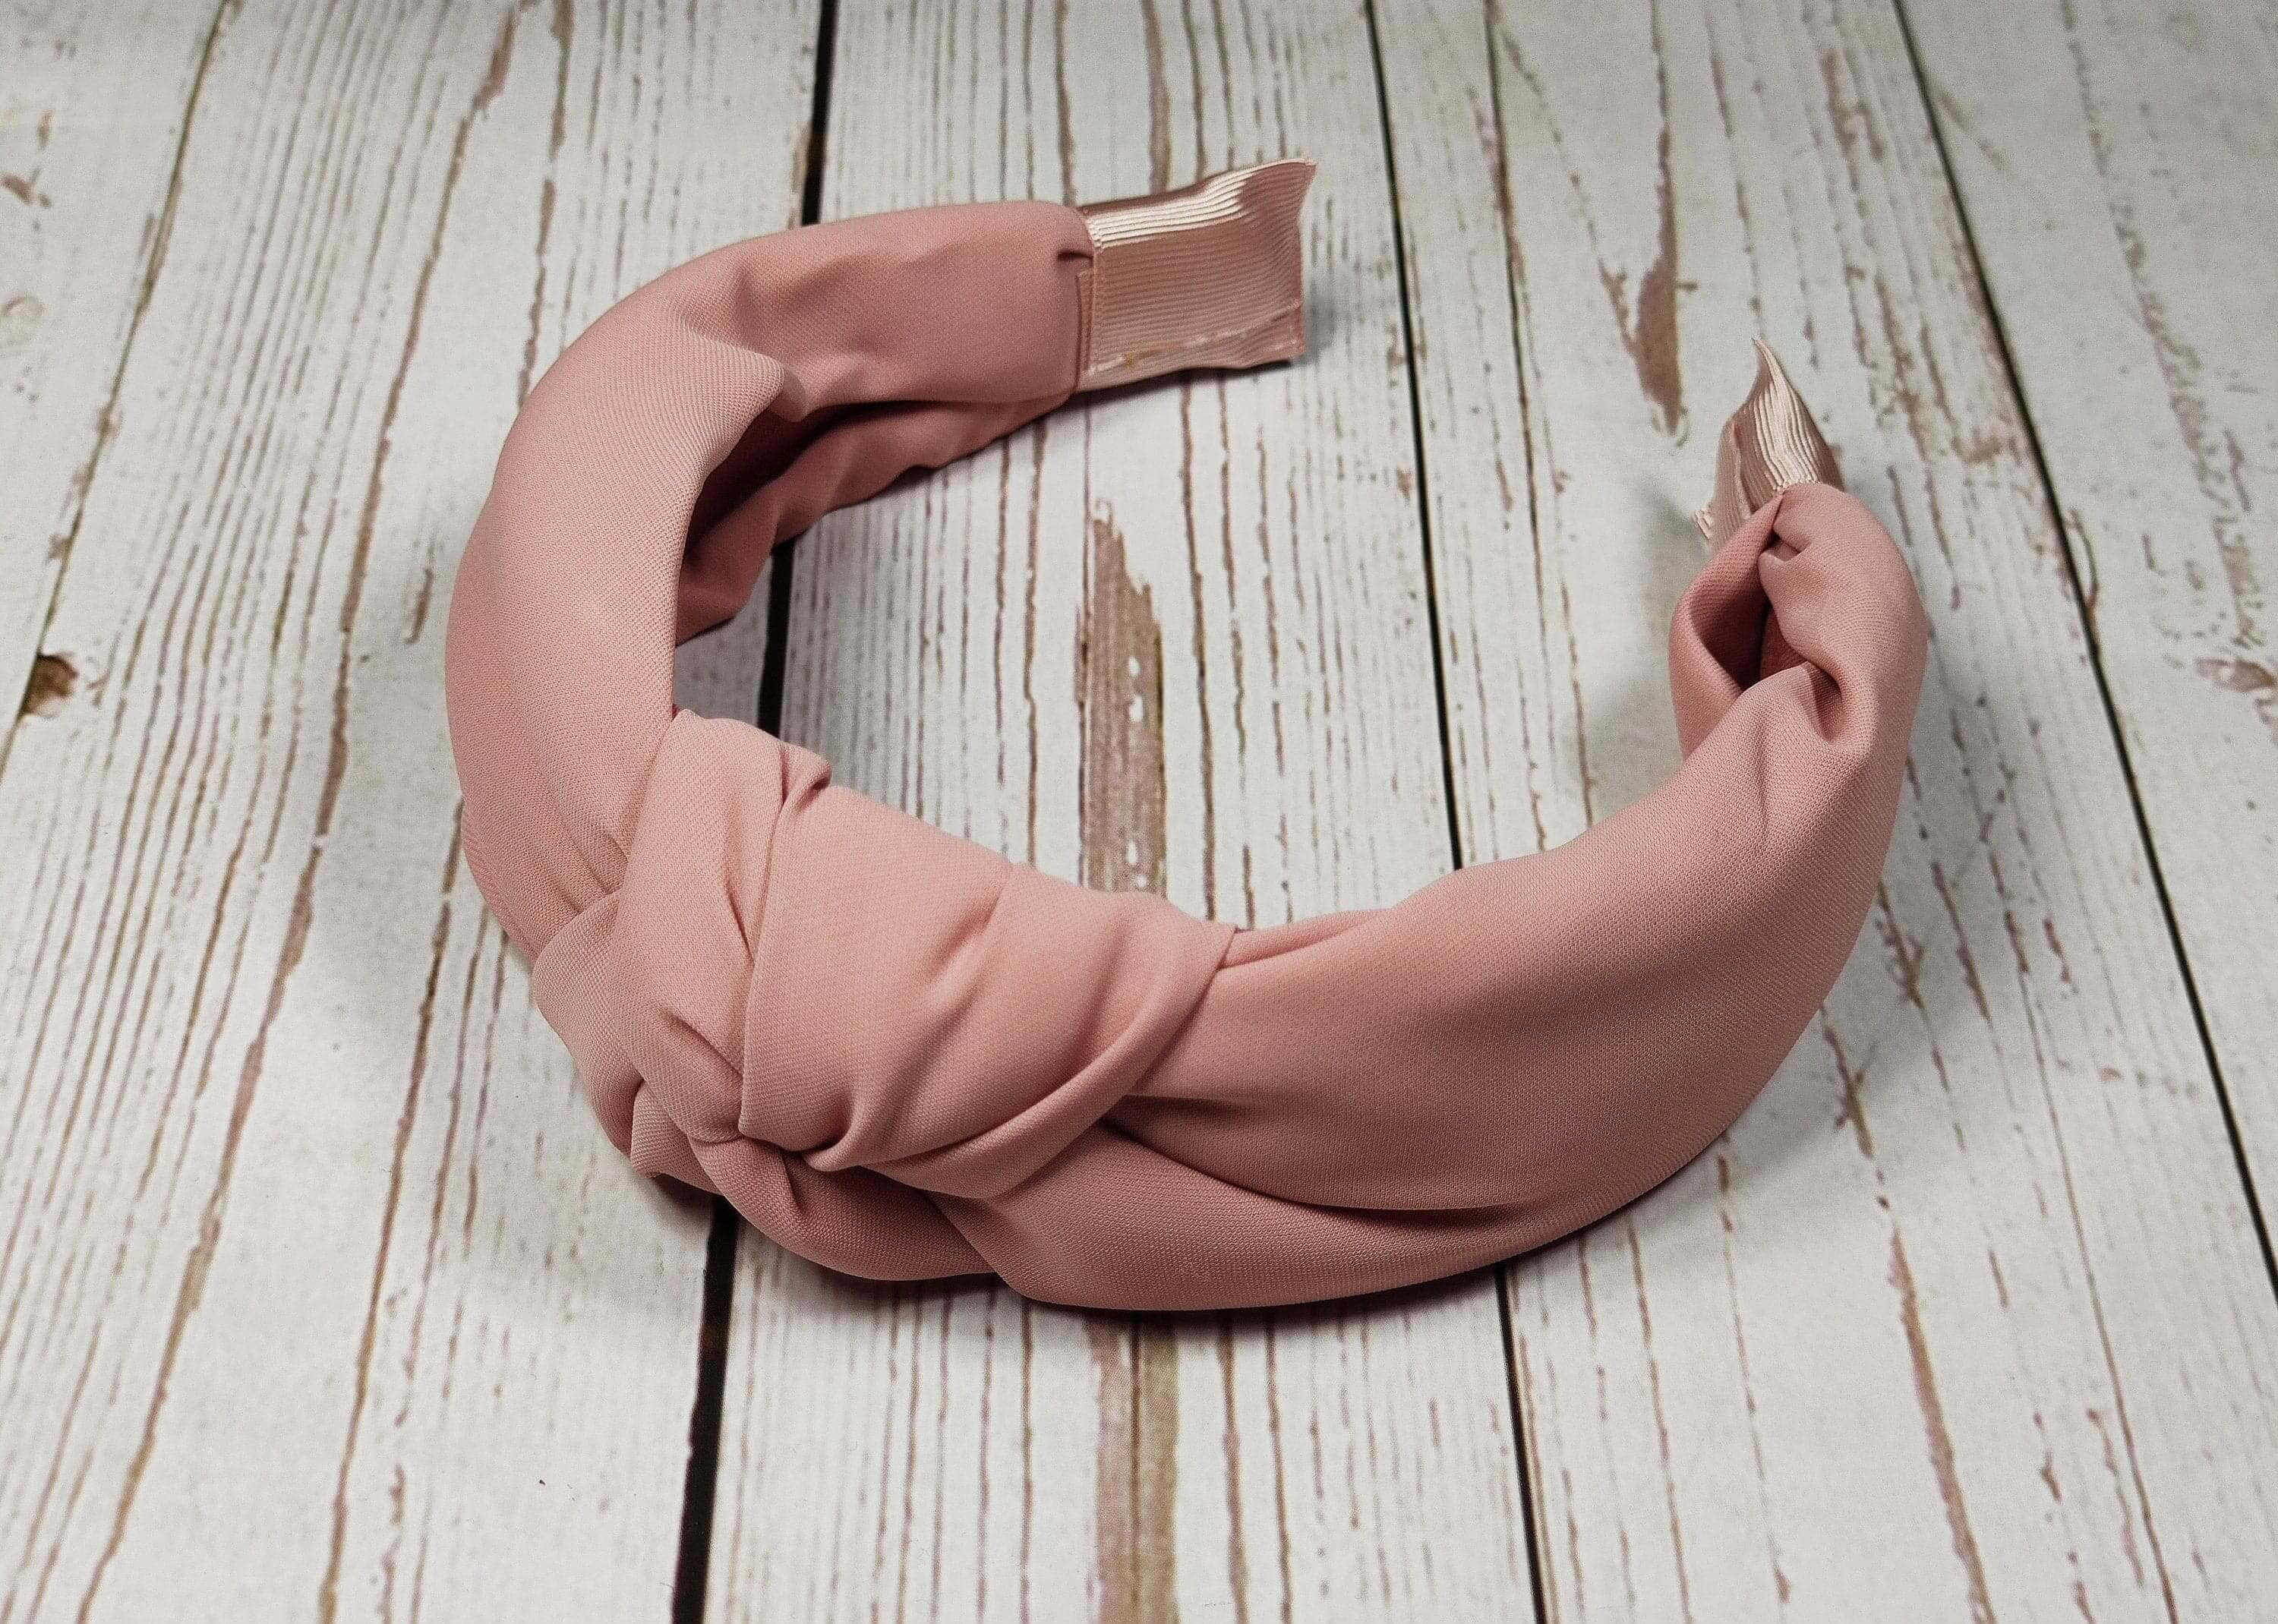 Steal the show this season with Salmon Pink Color Headband! This classy headband is perfect for a sophisticated and elegant look.